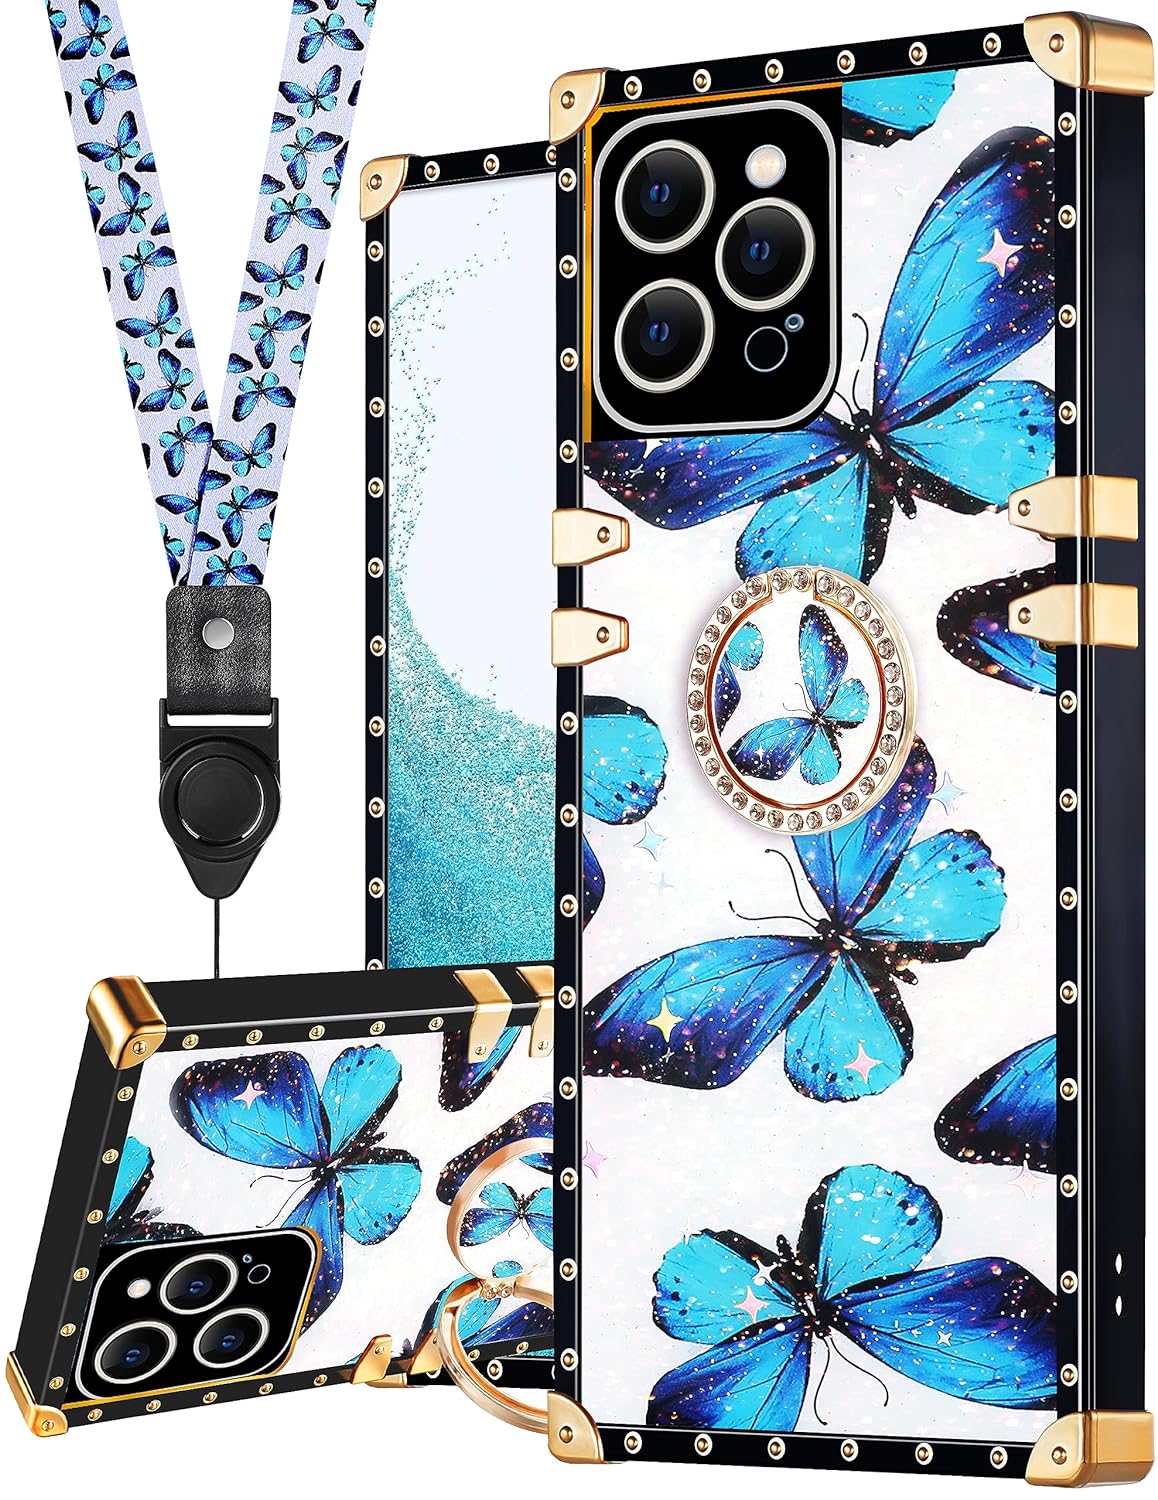 Loheckle for Square iPhone 11 Pro Max Case, Designer Retro Luxury Cases for Women with Ring Stand Holder and Lanyard, Stylish Butterfly Cute Cover for iPhone 11 Pro Max 6.5 Inch